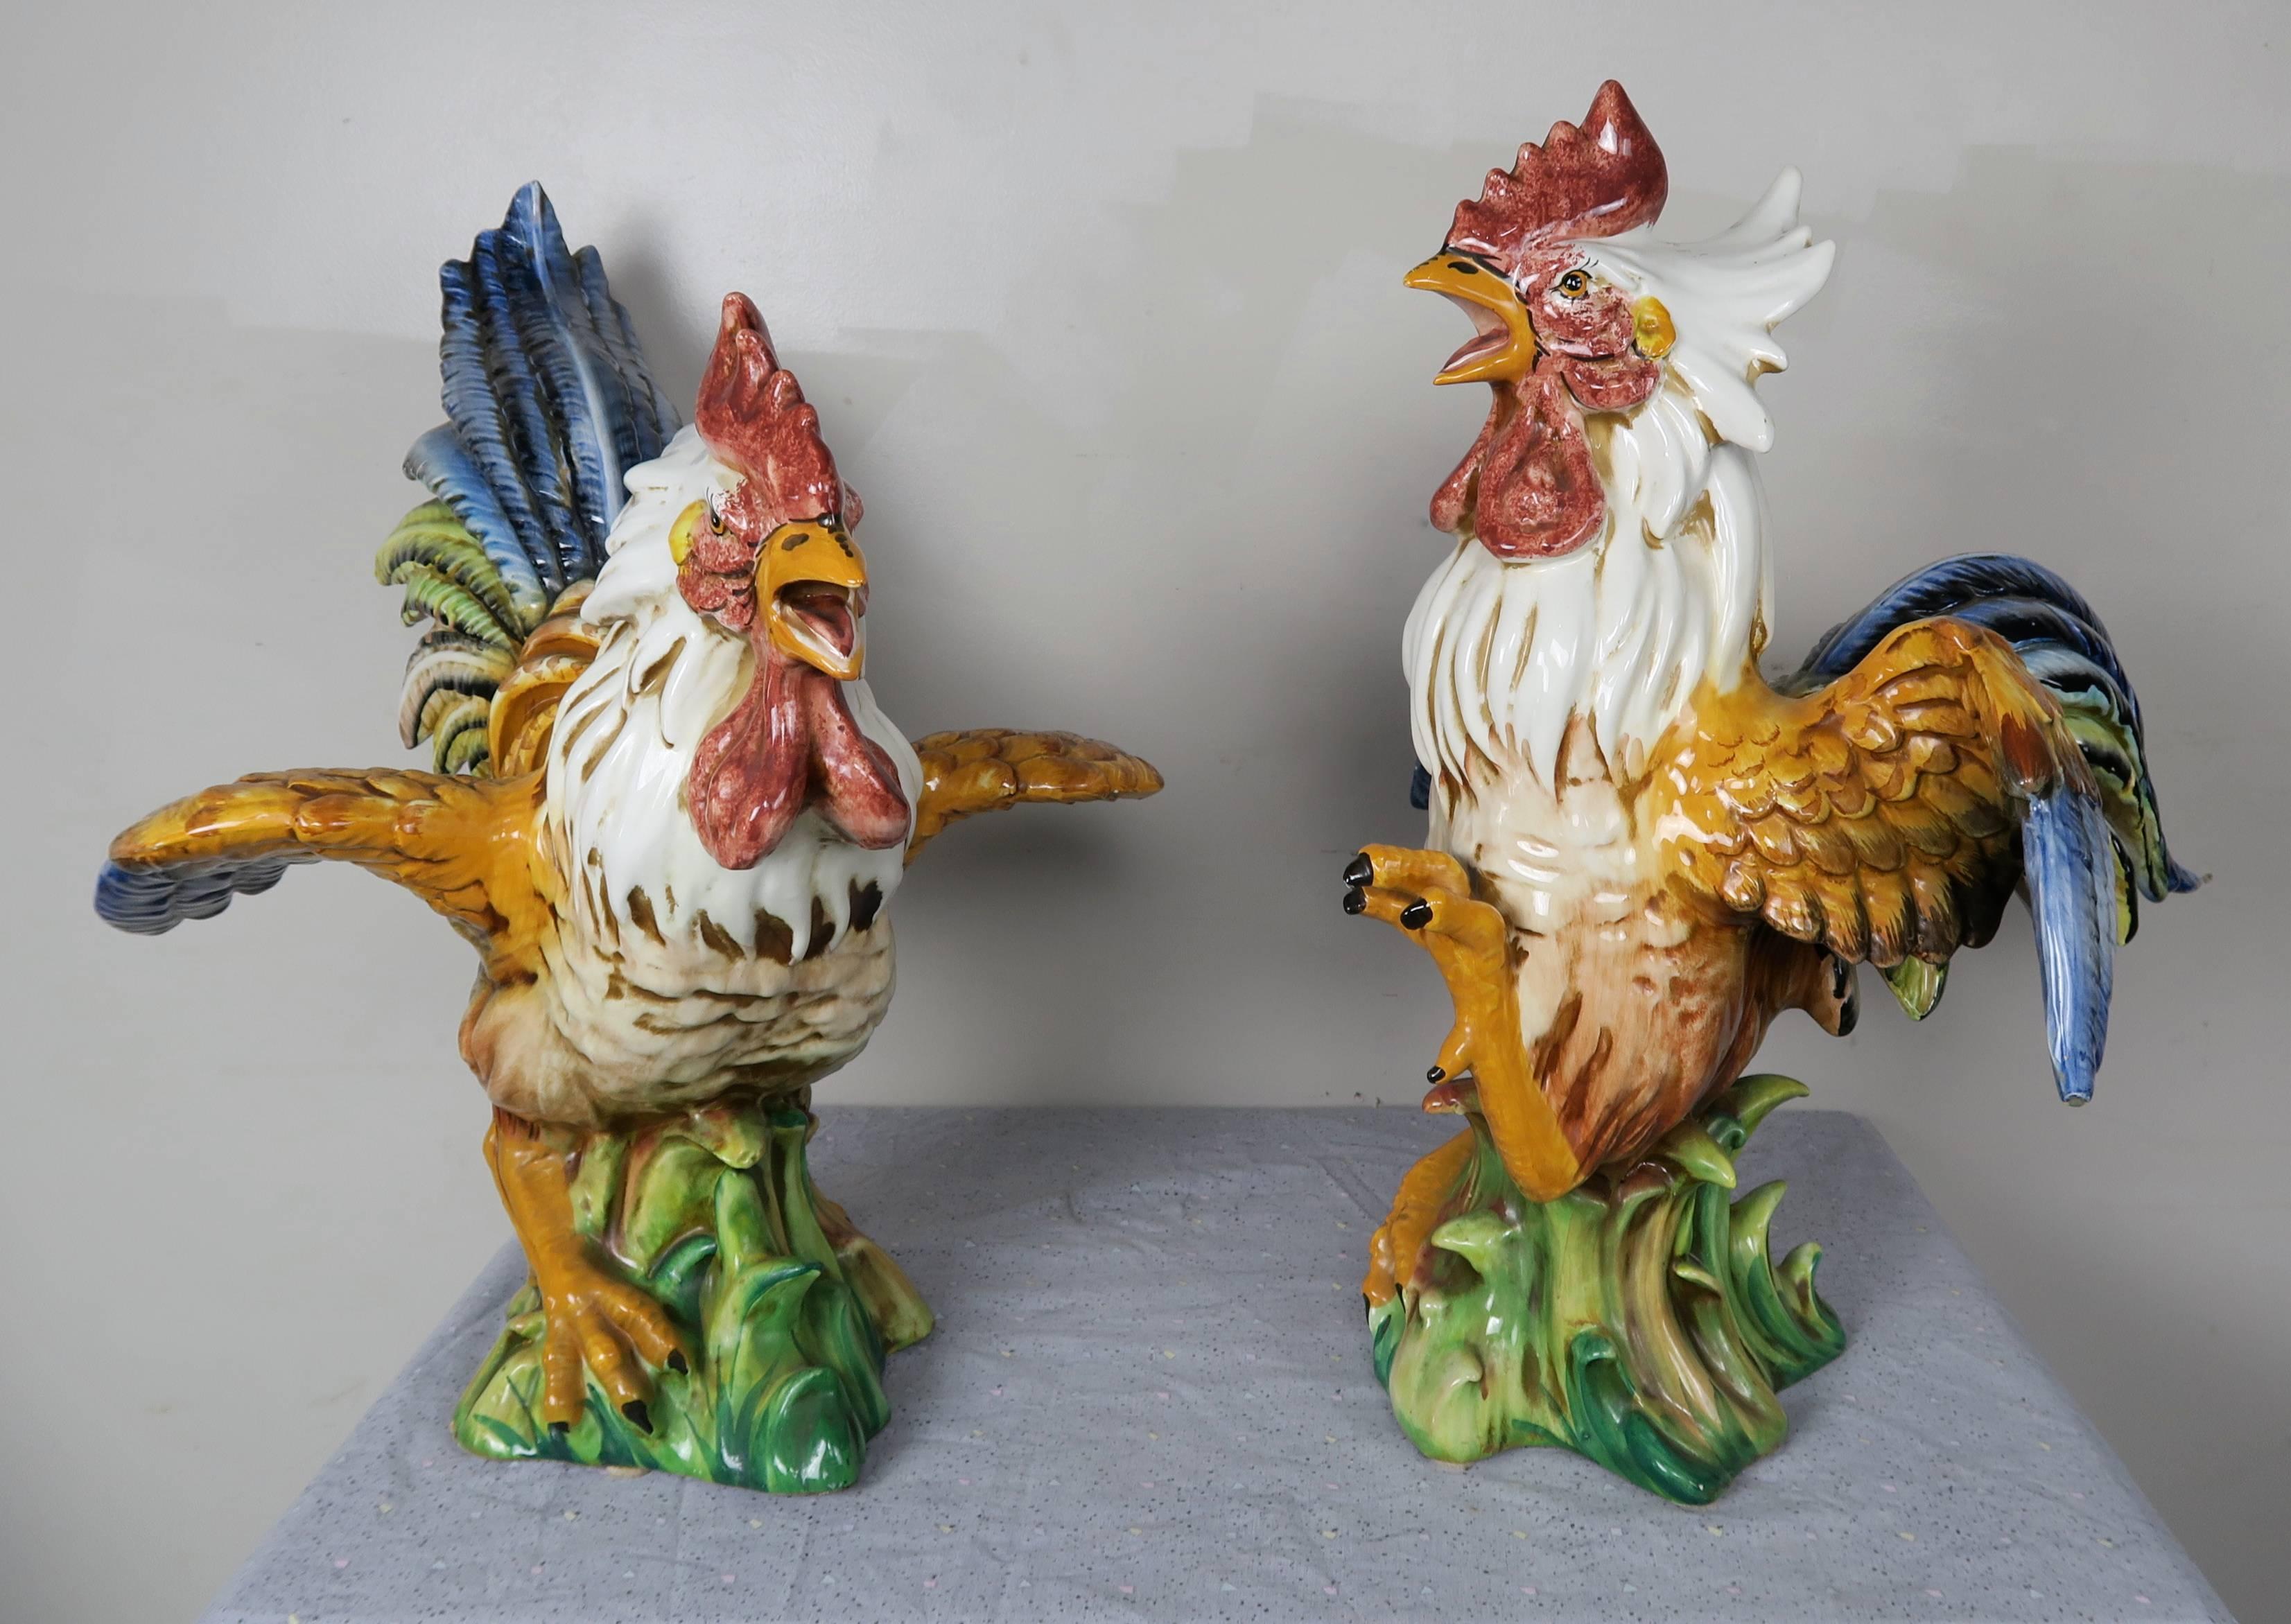 Italian vintage ceramic roosters, mid-20th century.
Measures: Taller 21 x 20 x 23.5
Shorter 22 x 19 x 22.5.